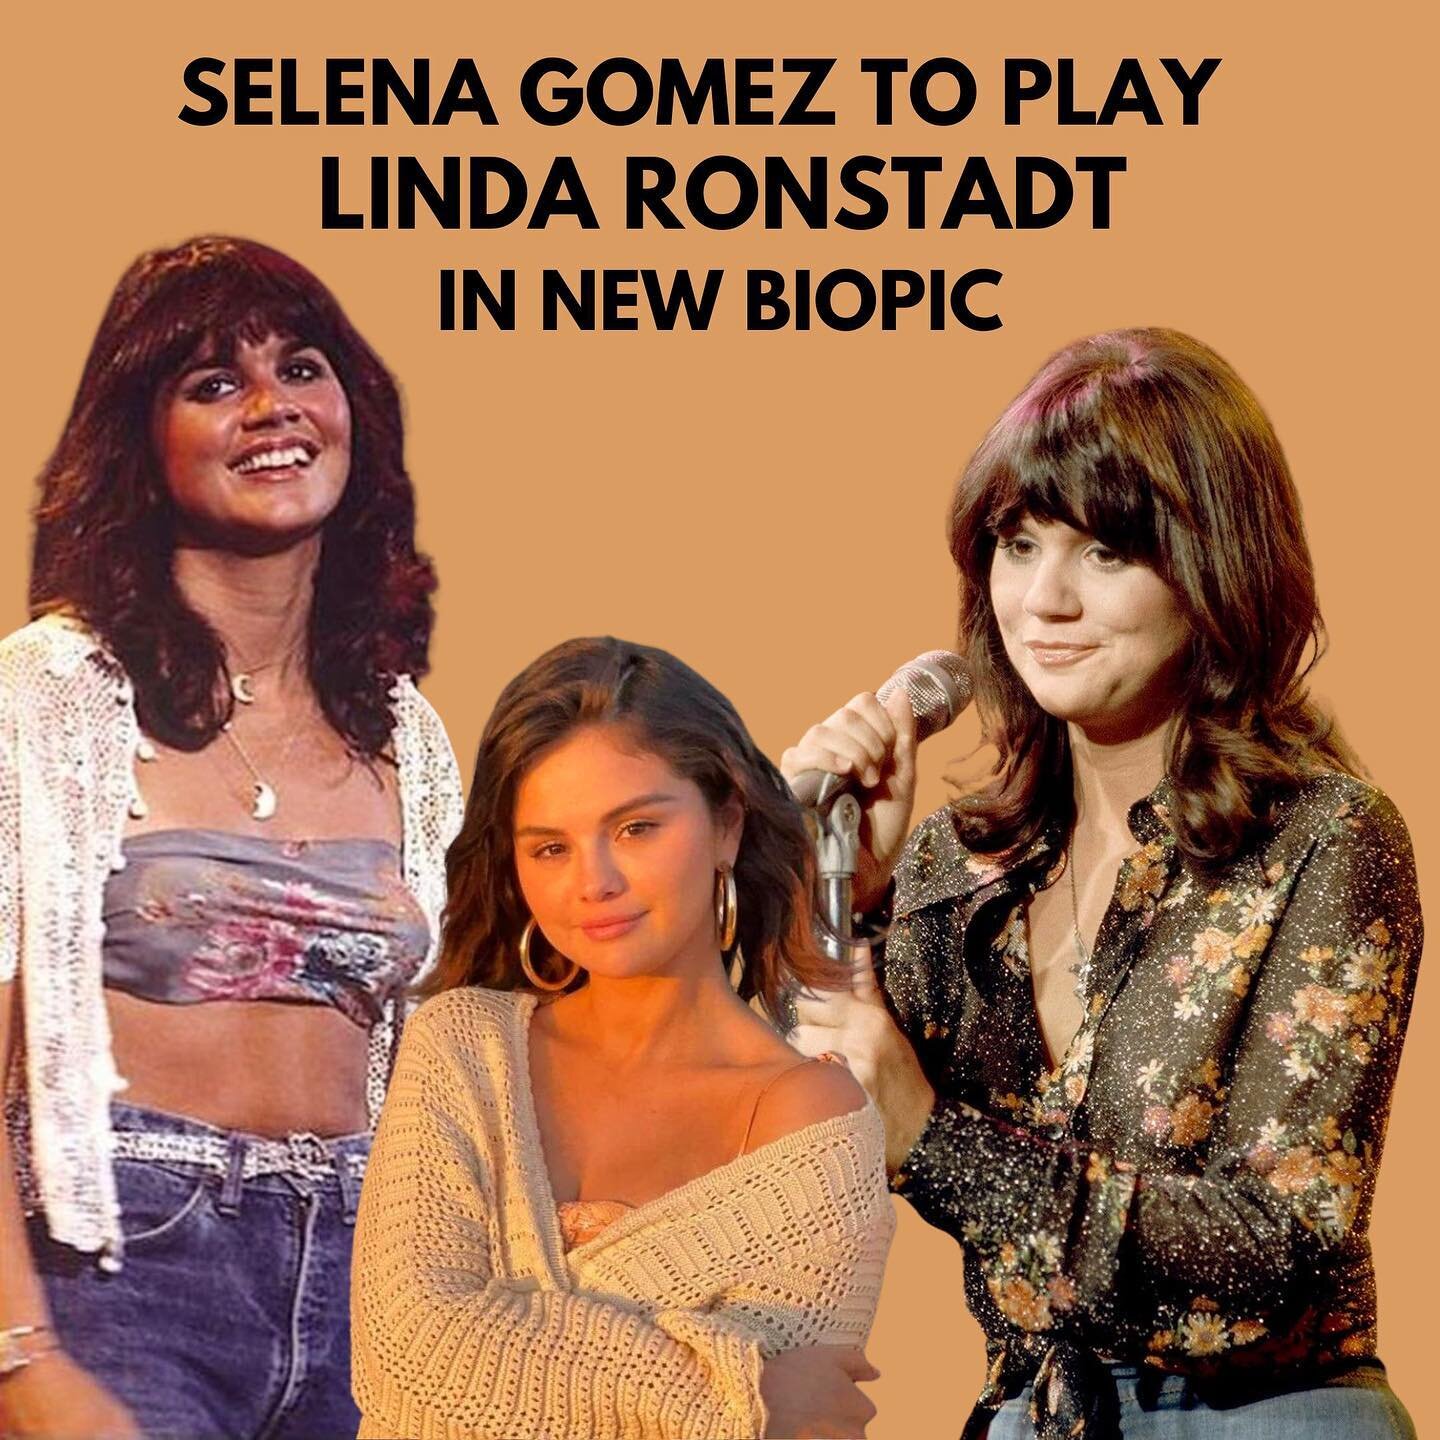 @lindaronstadtmusic will be portrayed by @selenagomez in an upcoming biopic, @variety has confirmed.

The music biopic is currently in pre-production, with producers including Ronstadt&rsquo;s manager who produced the 2019 documentary &ldquo;Linda Ro